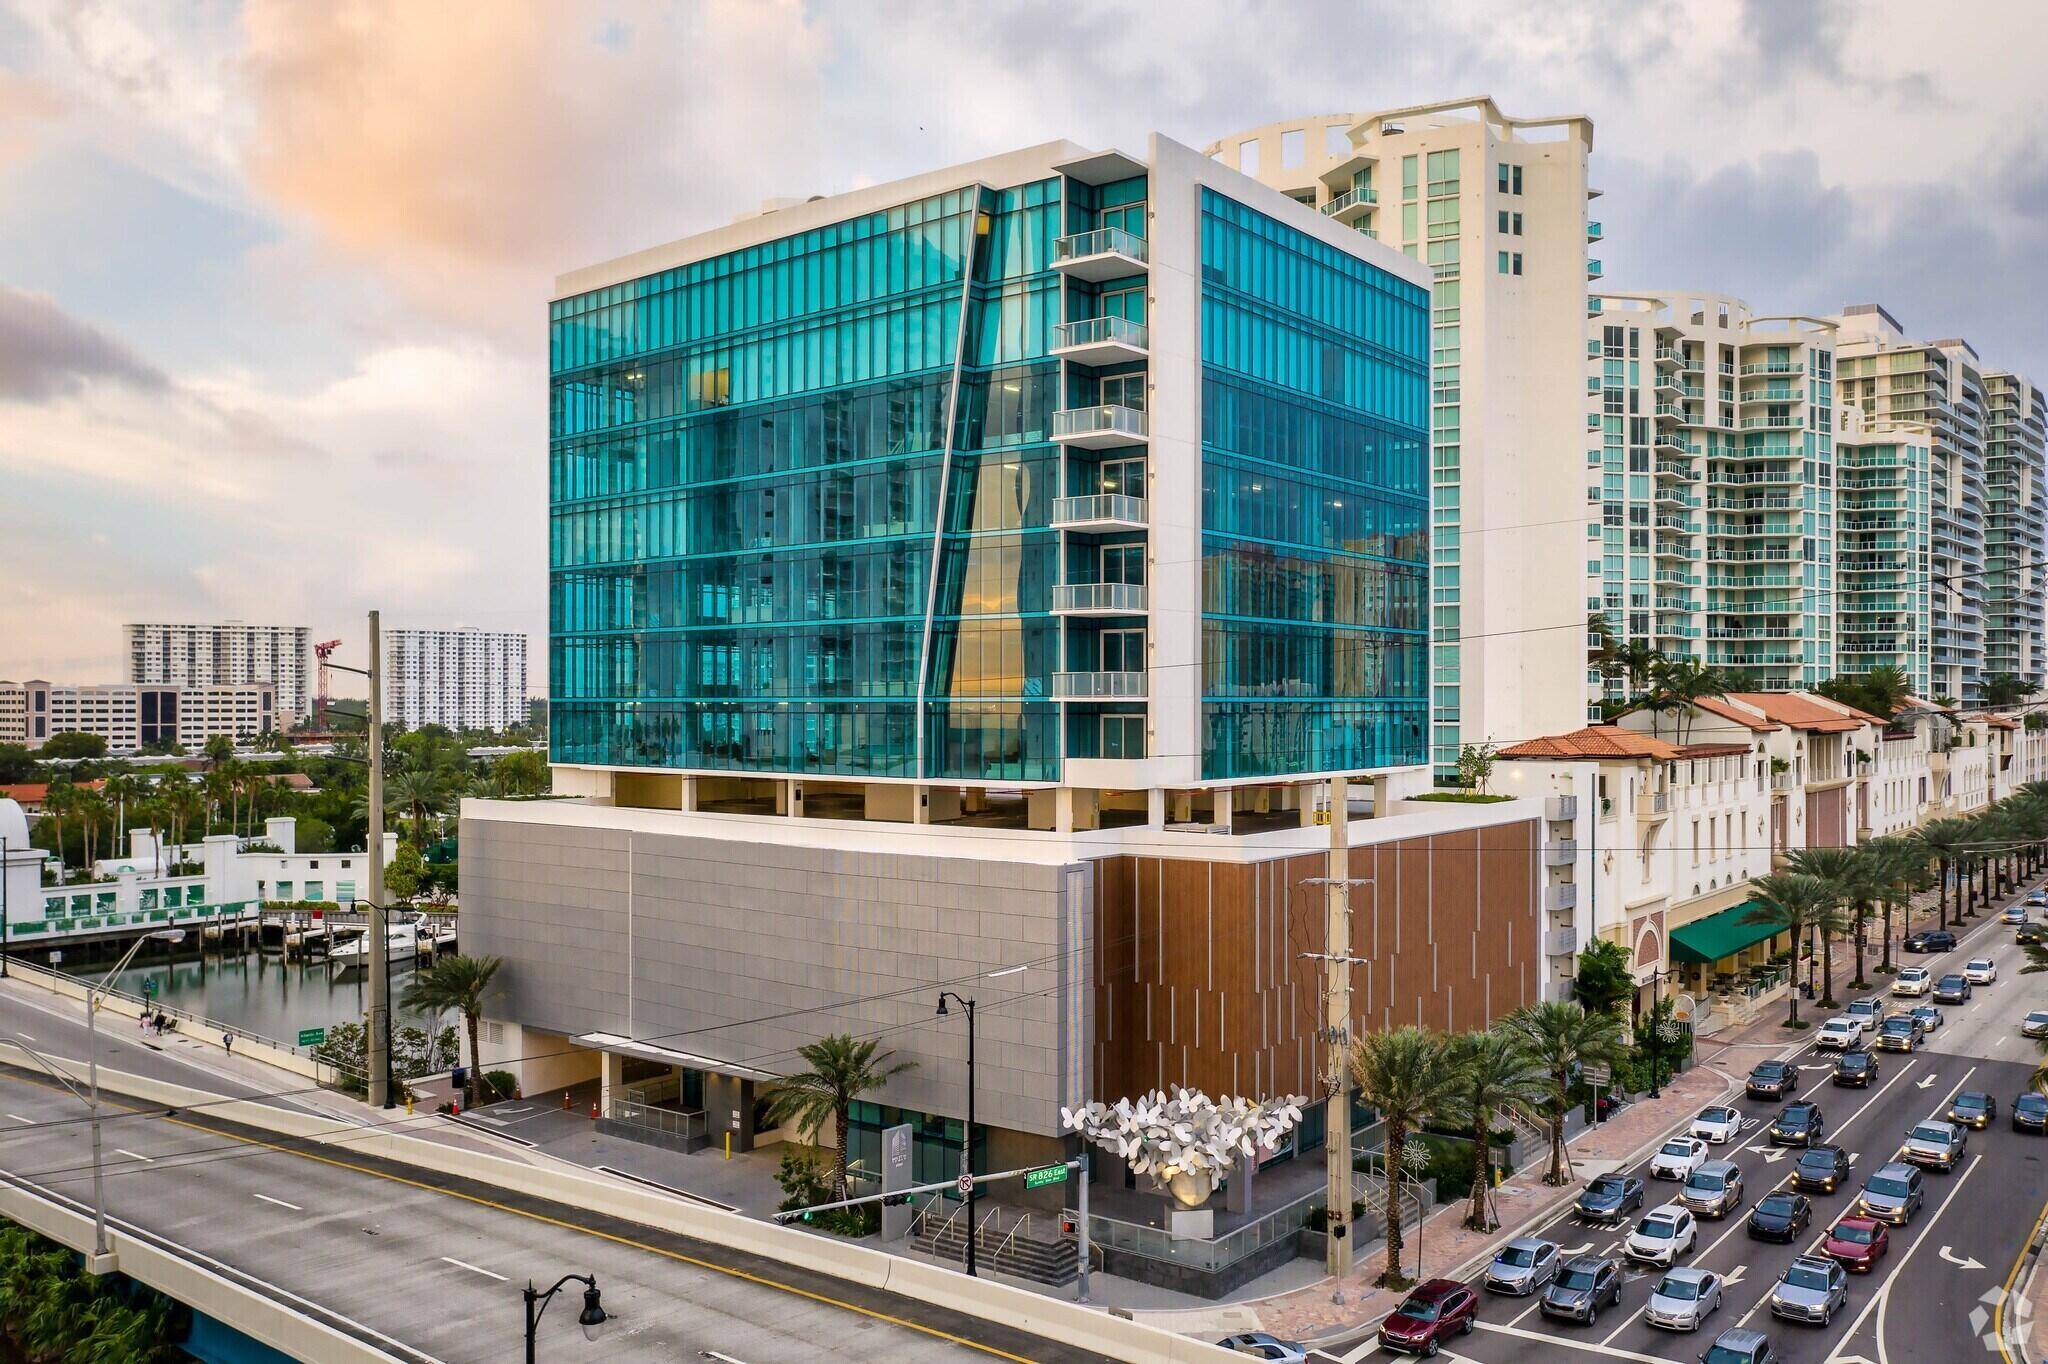 FULL BUILDOUT BRAND NEW UNDER CONSTRACTION WILL BE AVALIBLE STARTING JULY AUGUST Make office work an enjoyable experience with this office space in Sunny Isles Beach.